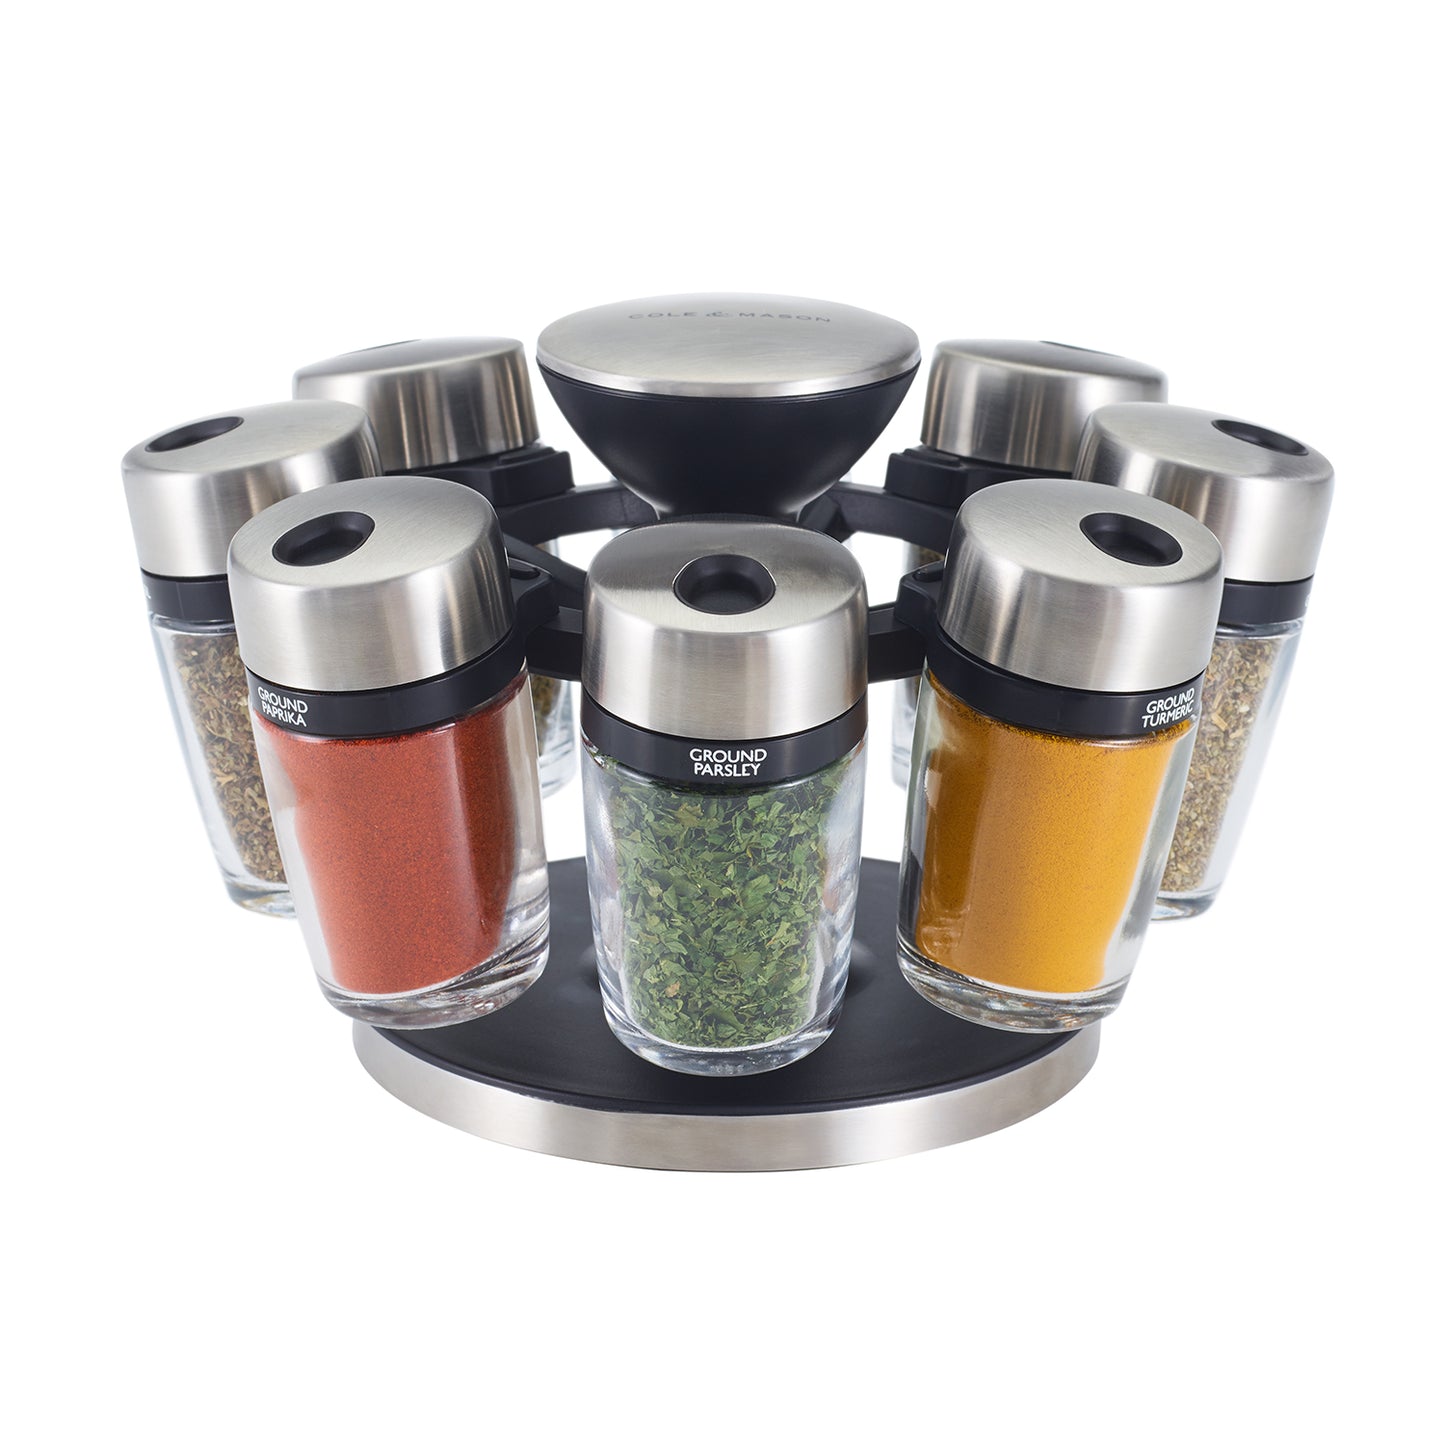 Cole & Mason Premium 8 Jar Filled Herb & Spice Carousel, Stainless Steel & Glass, 13.5cm